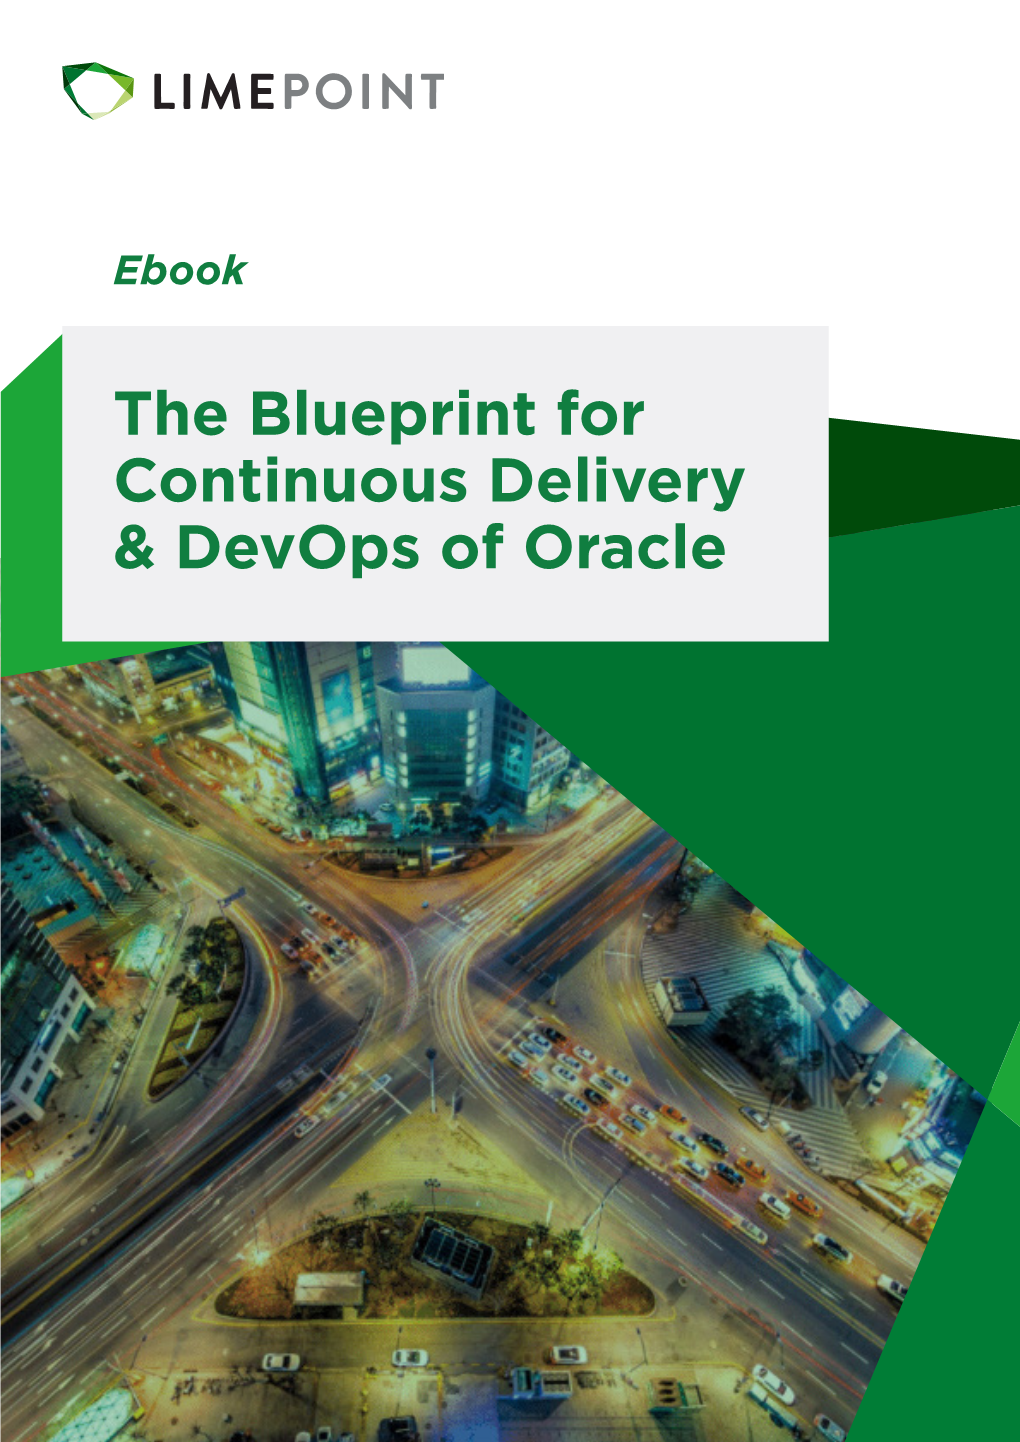 The Blueprint for Continuous Delivery & Devops of Oracle